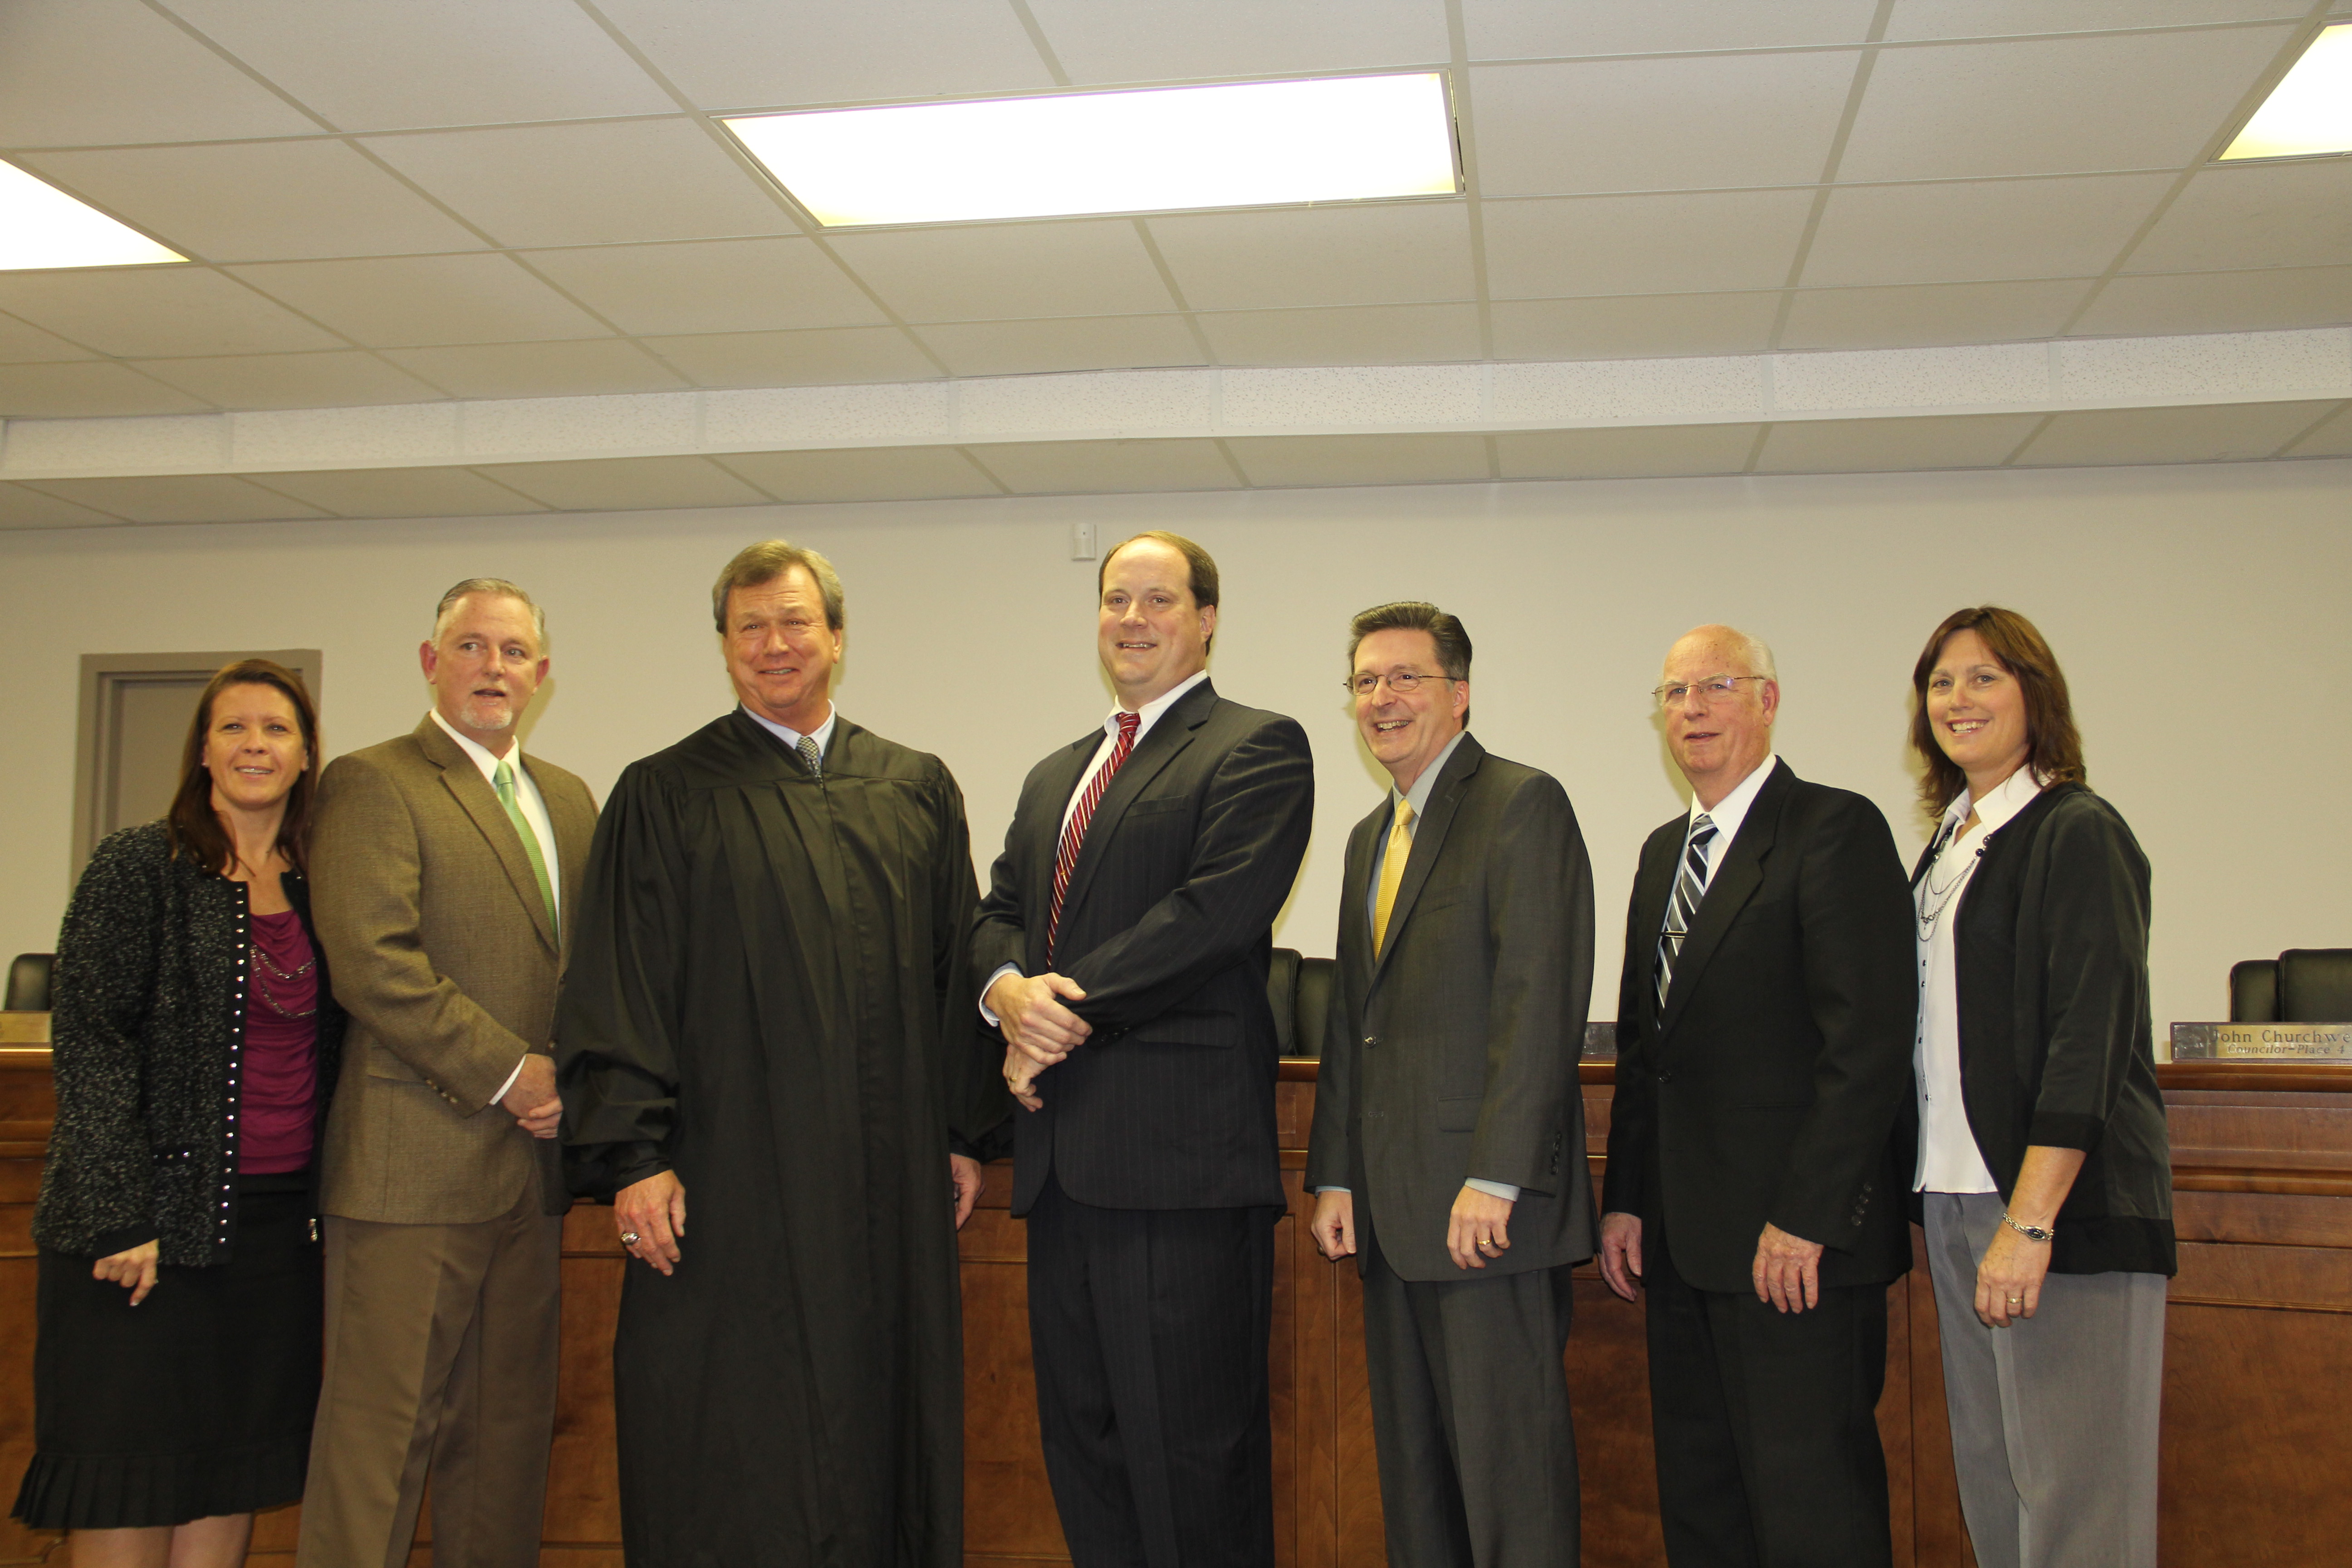 Trussville appoints new council members, looks forward to future